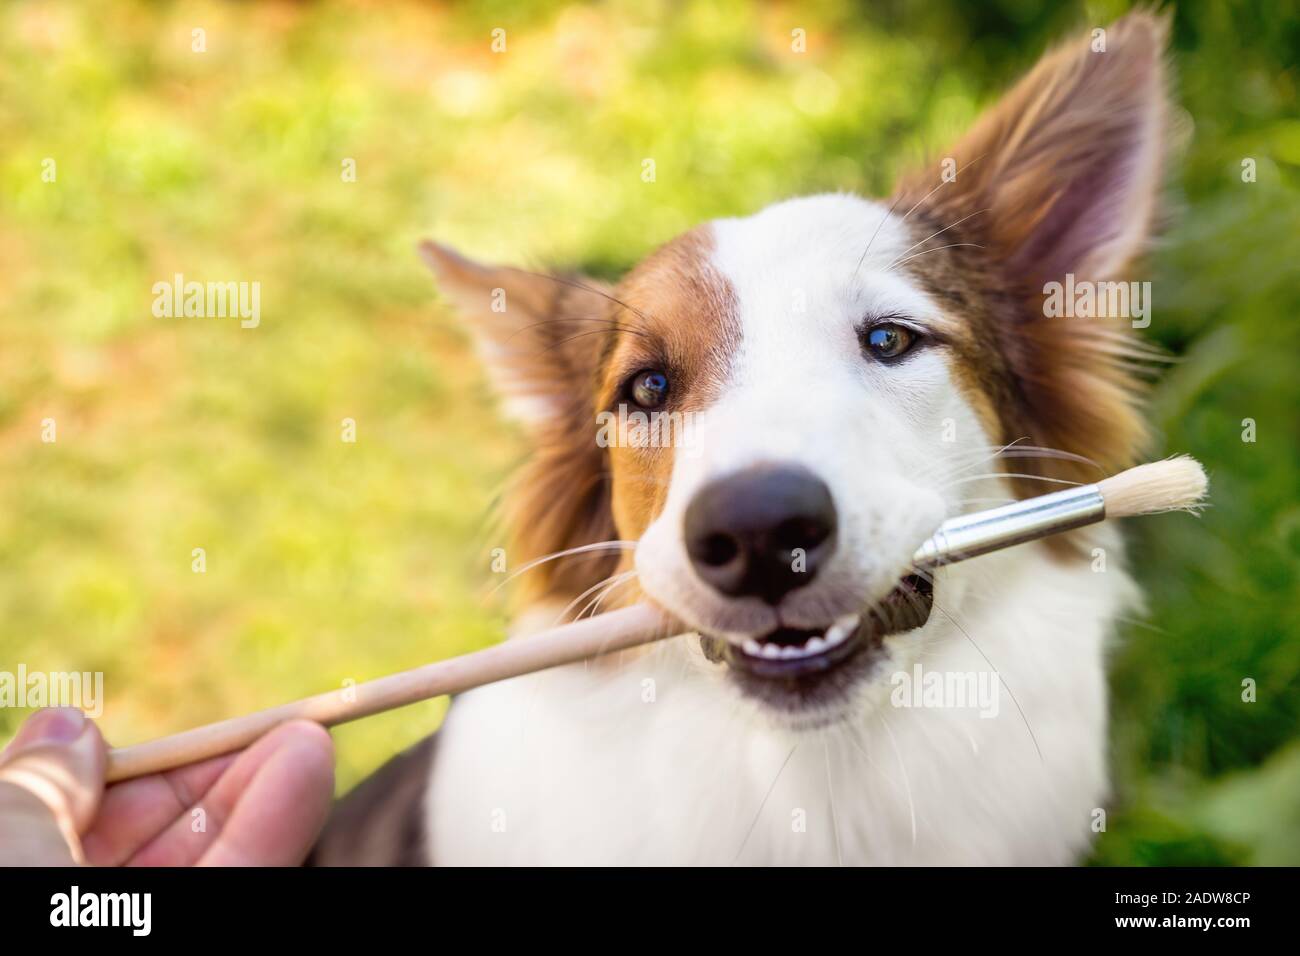 funny cute puppy dog with a brush in his mouth, looks like a big smile Stock Photo